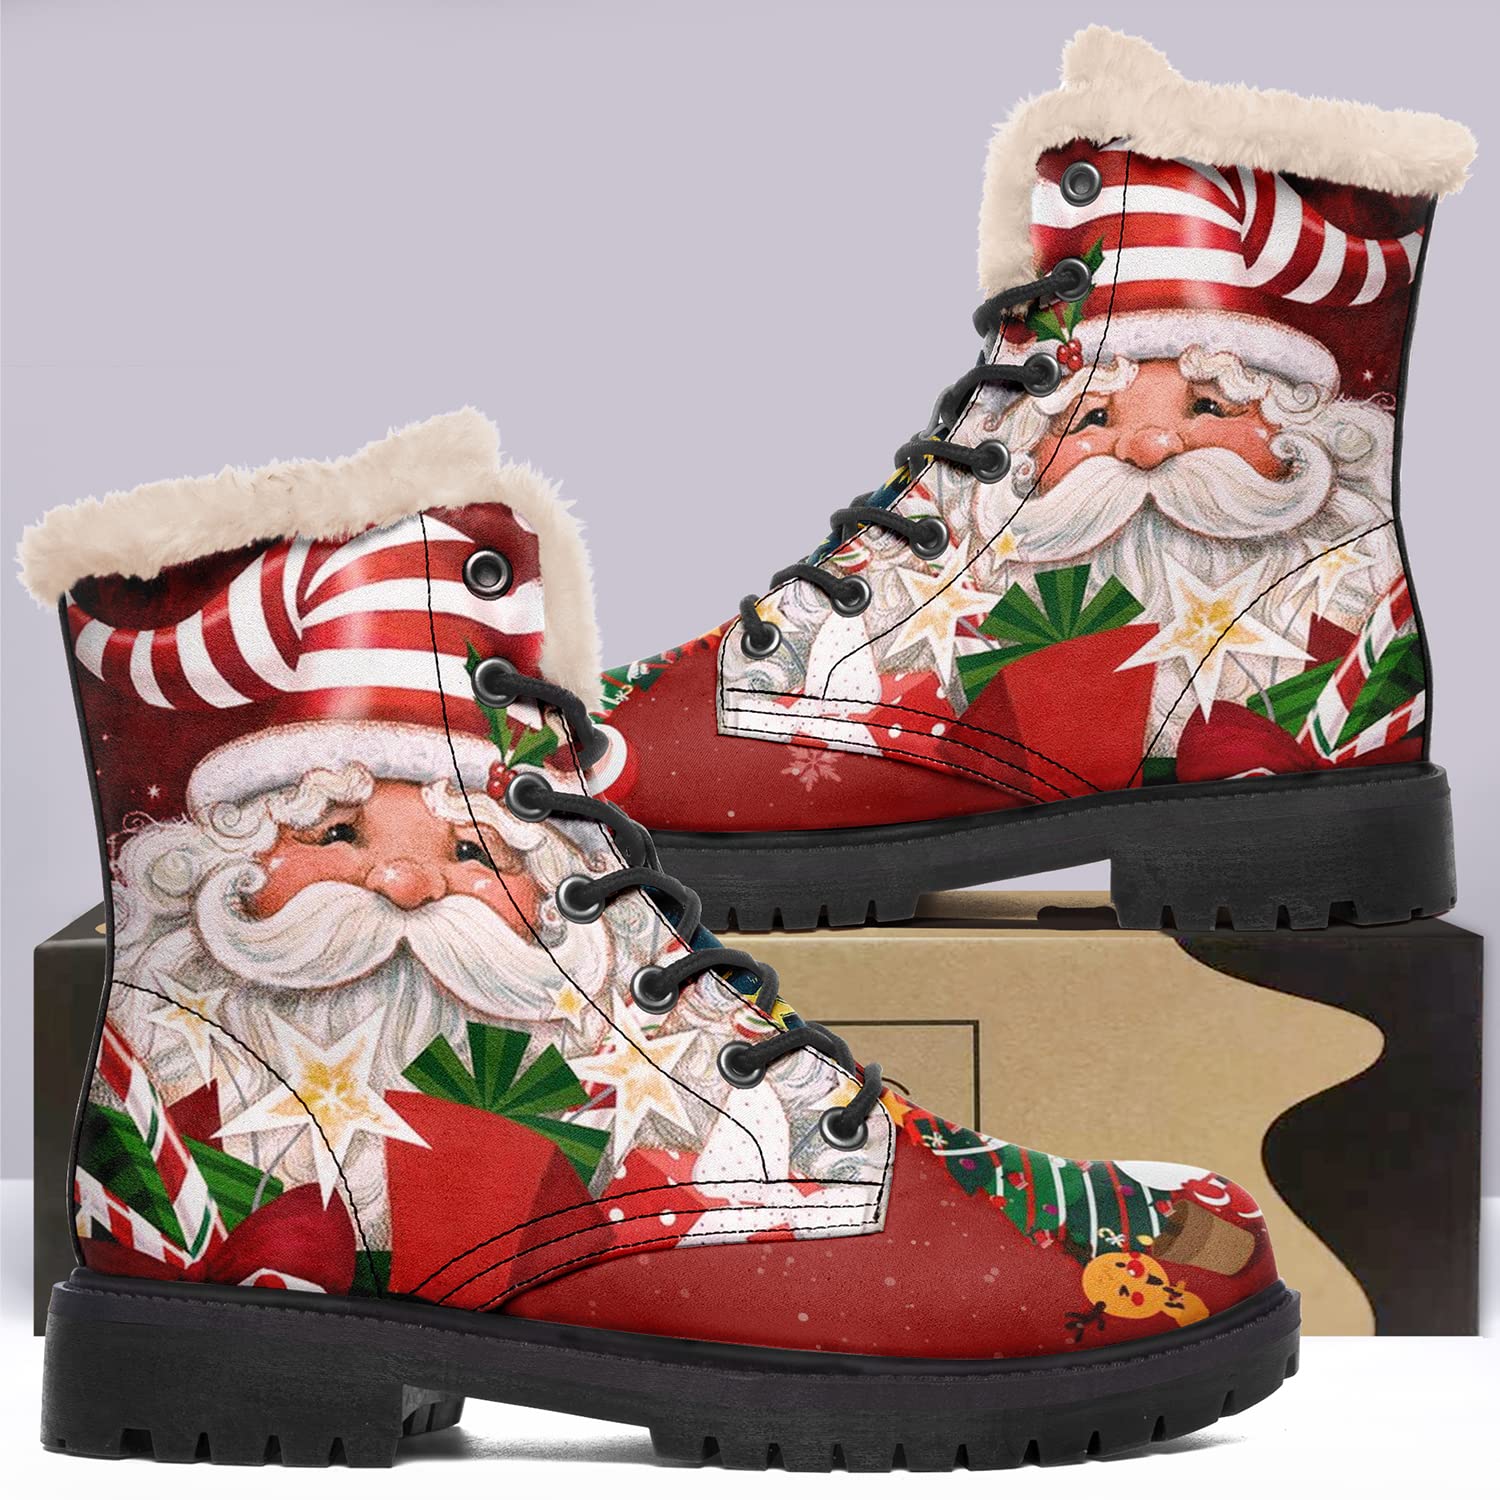 Winter Boots for Women, Custom Christmas Boots Santa Claus Print Ladies Fur Lined Lace up Ankle Boots 